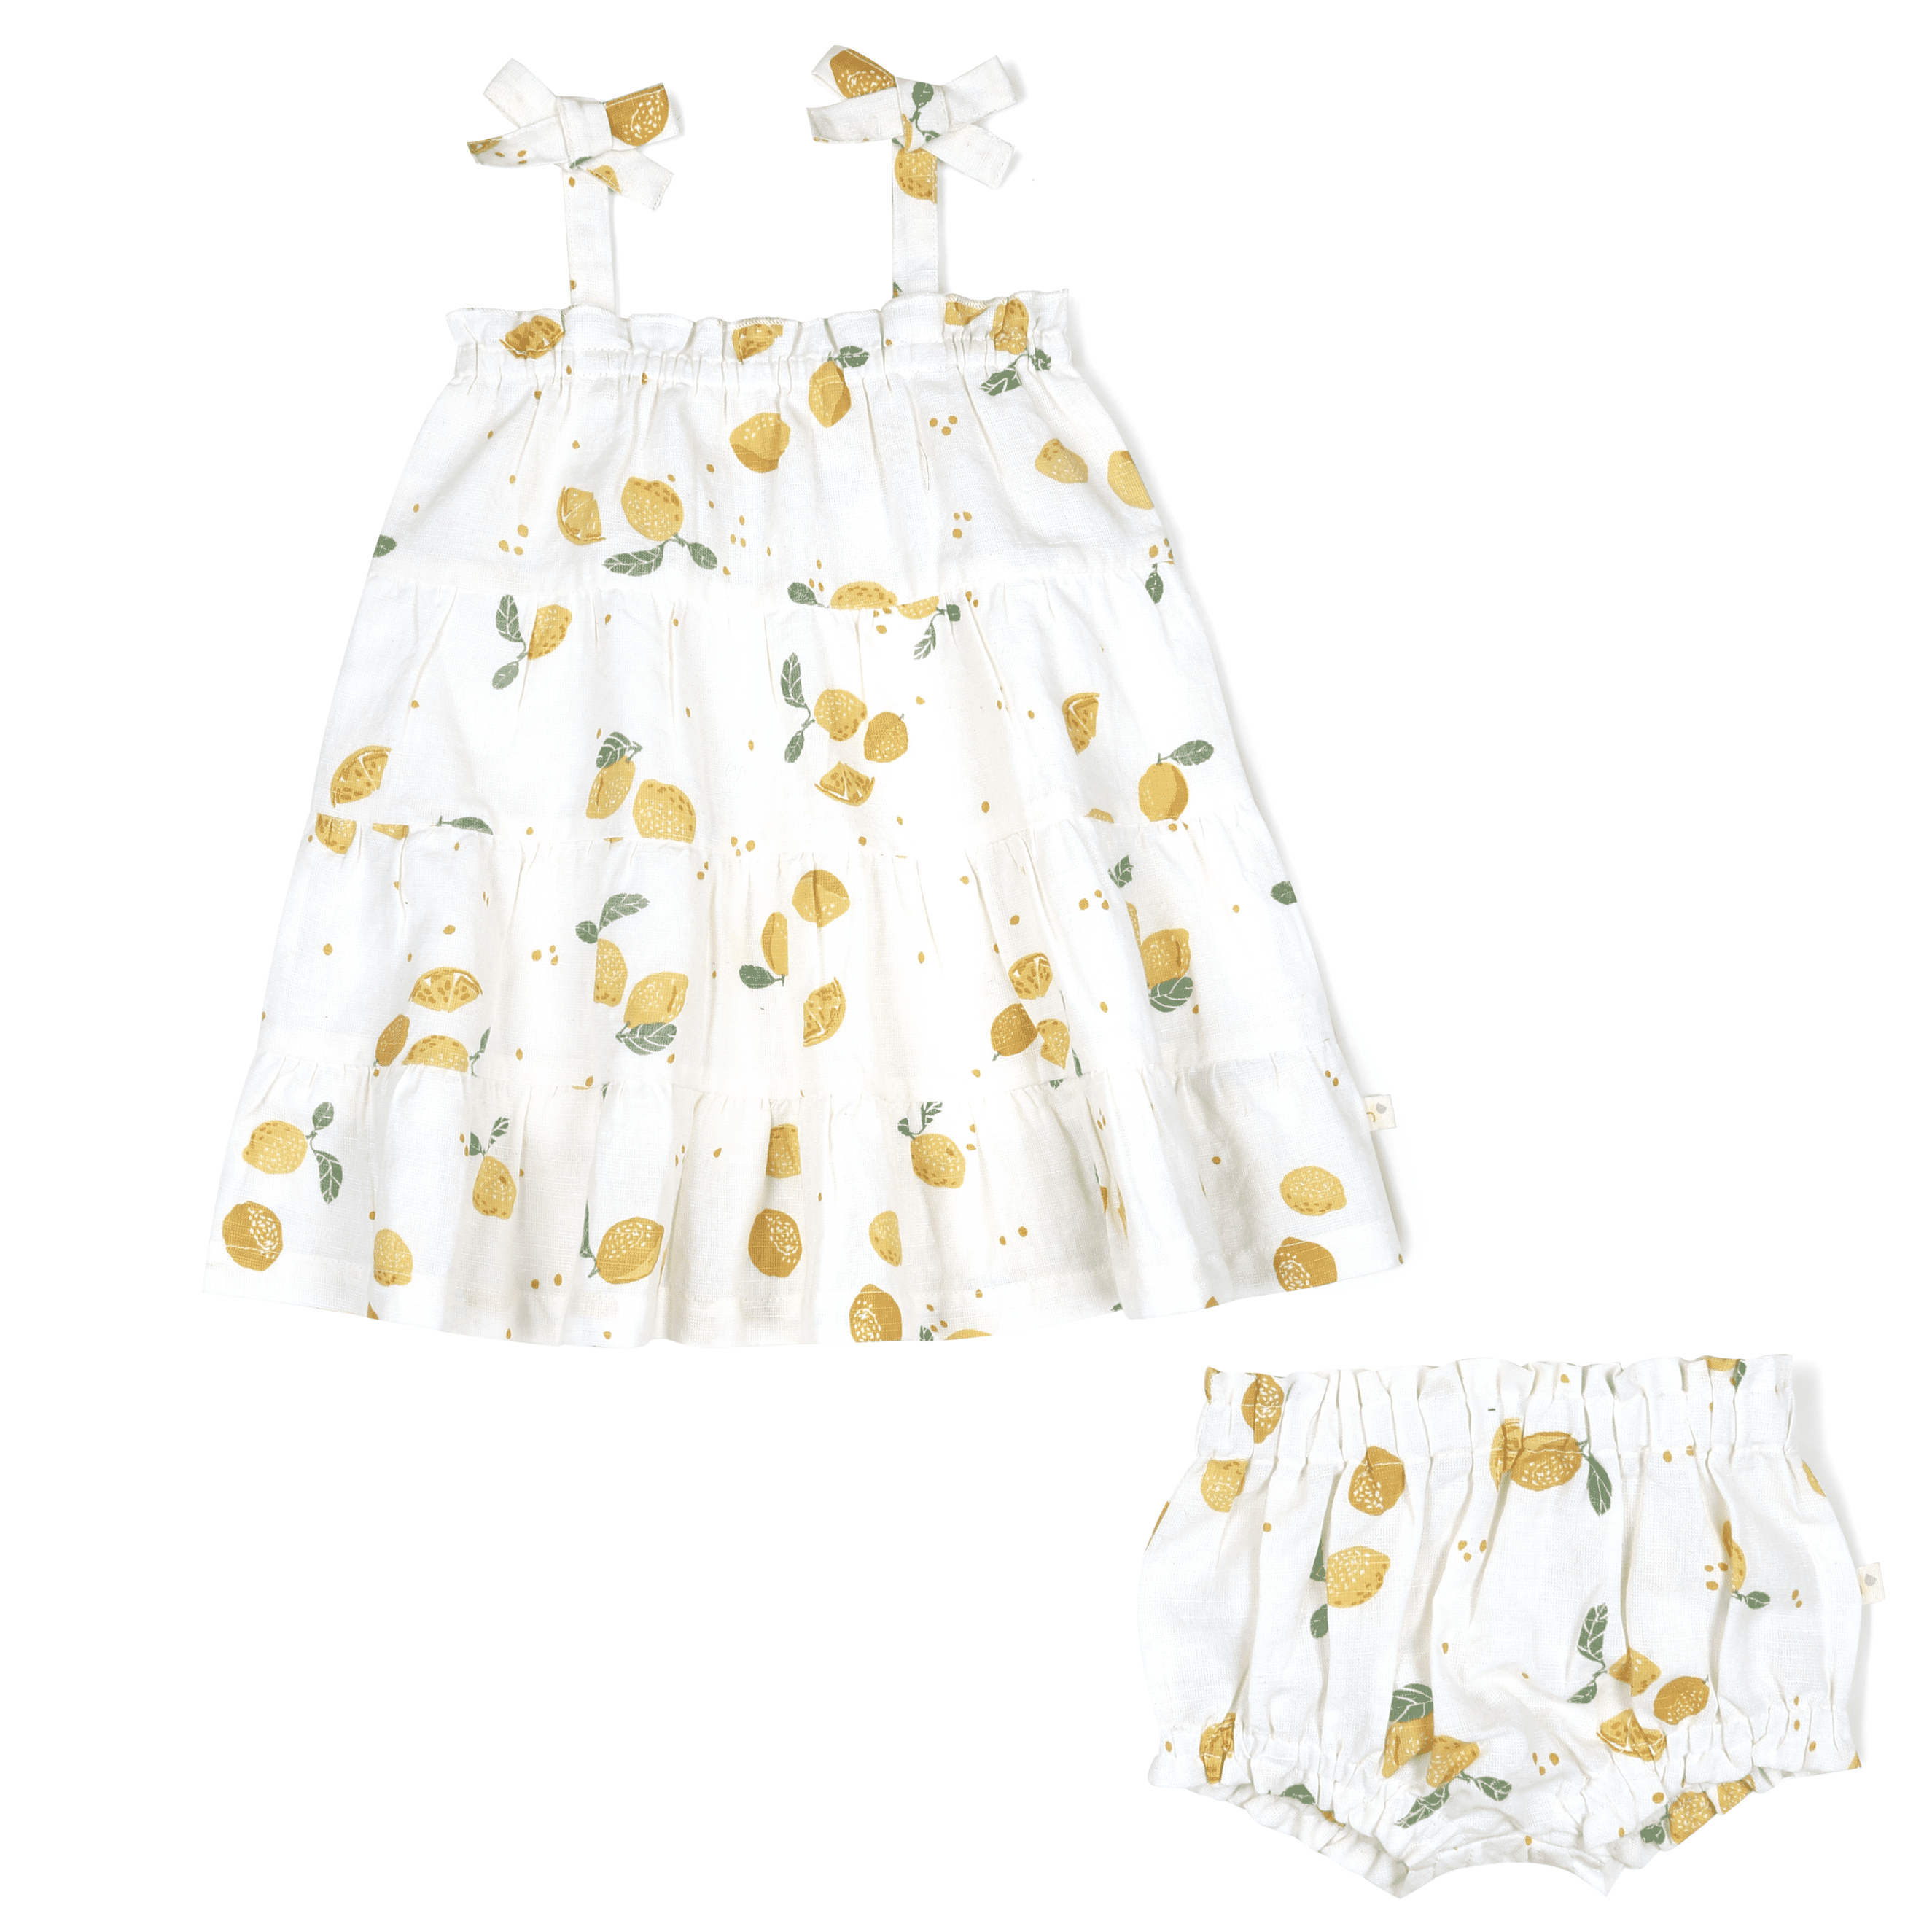 White baby's outfit with a sleeveless dress and matching bloomers, both adorned with a pattern of gold and green lemons. The Organic Linen Tiered Strap Dress - Citron features bow-tied shoulder straps and a full skirt. (Brand Name: Makemake Organics)